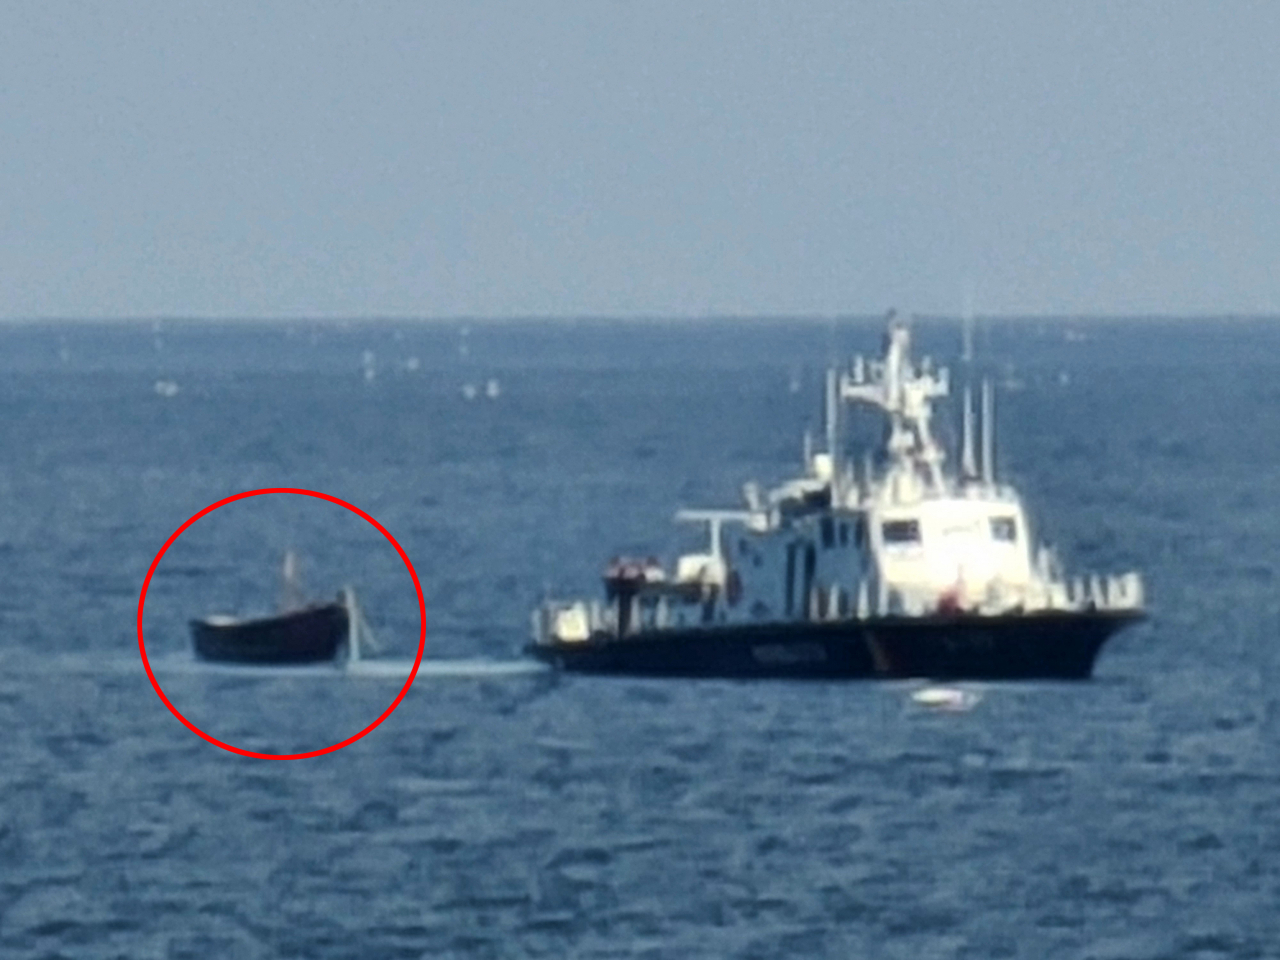 A wooden boat (in red circle) is towed by a South Korean military vessel toward a port in Yangyang, Gangwon Province, northeastern South Korea, on Tuesday, after a group of four unidentified individuals from North Korea crossed the eastern maritime inter-Korean border on the boat and spotted in waters off the nearby city of Sokcho. (Yonhap)